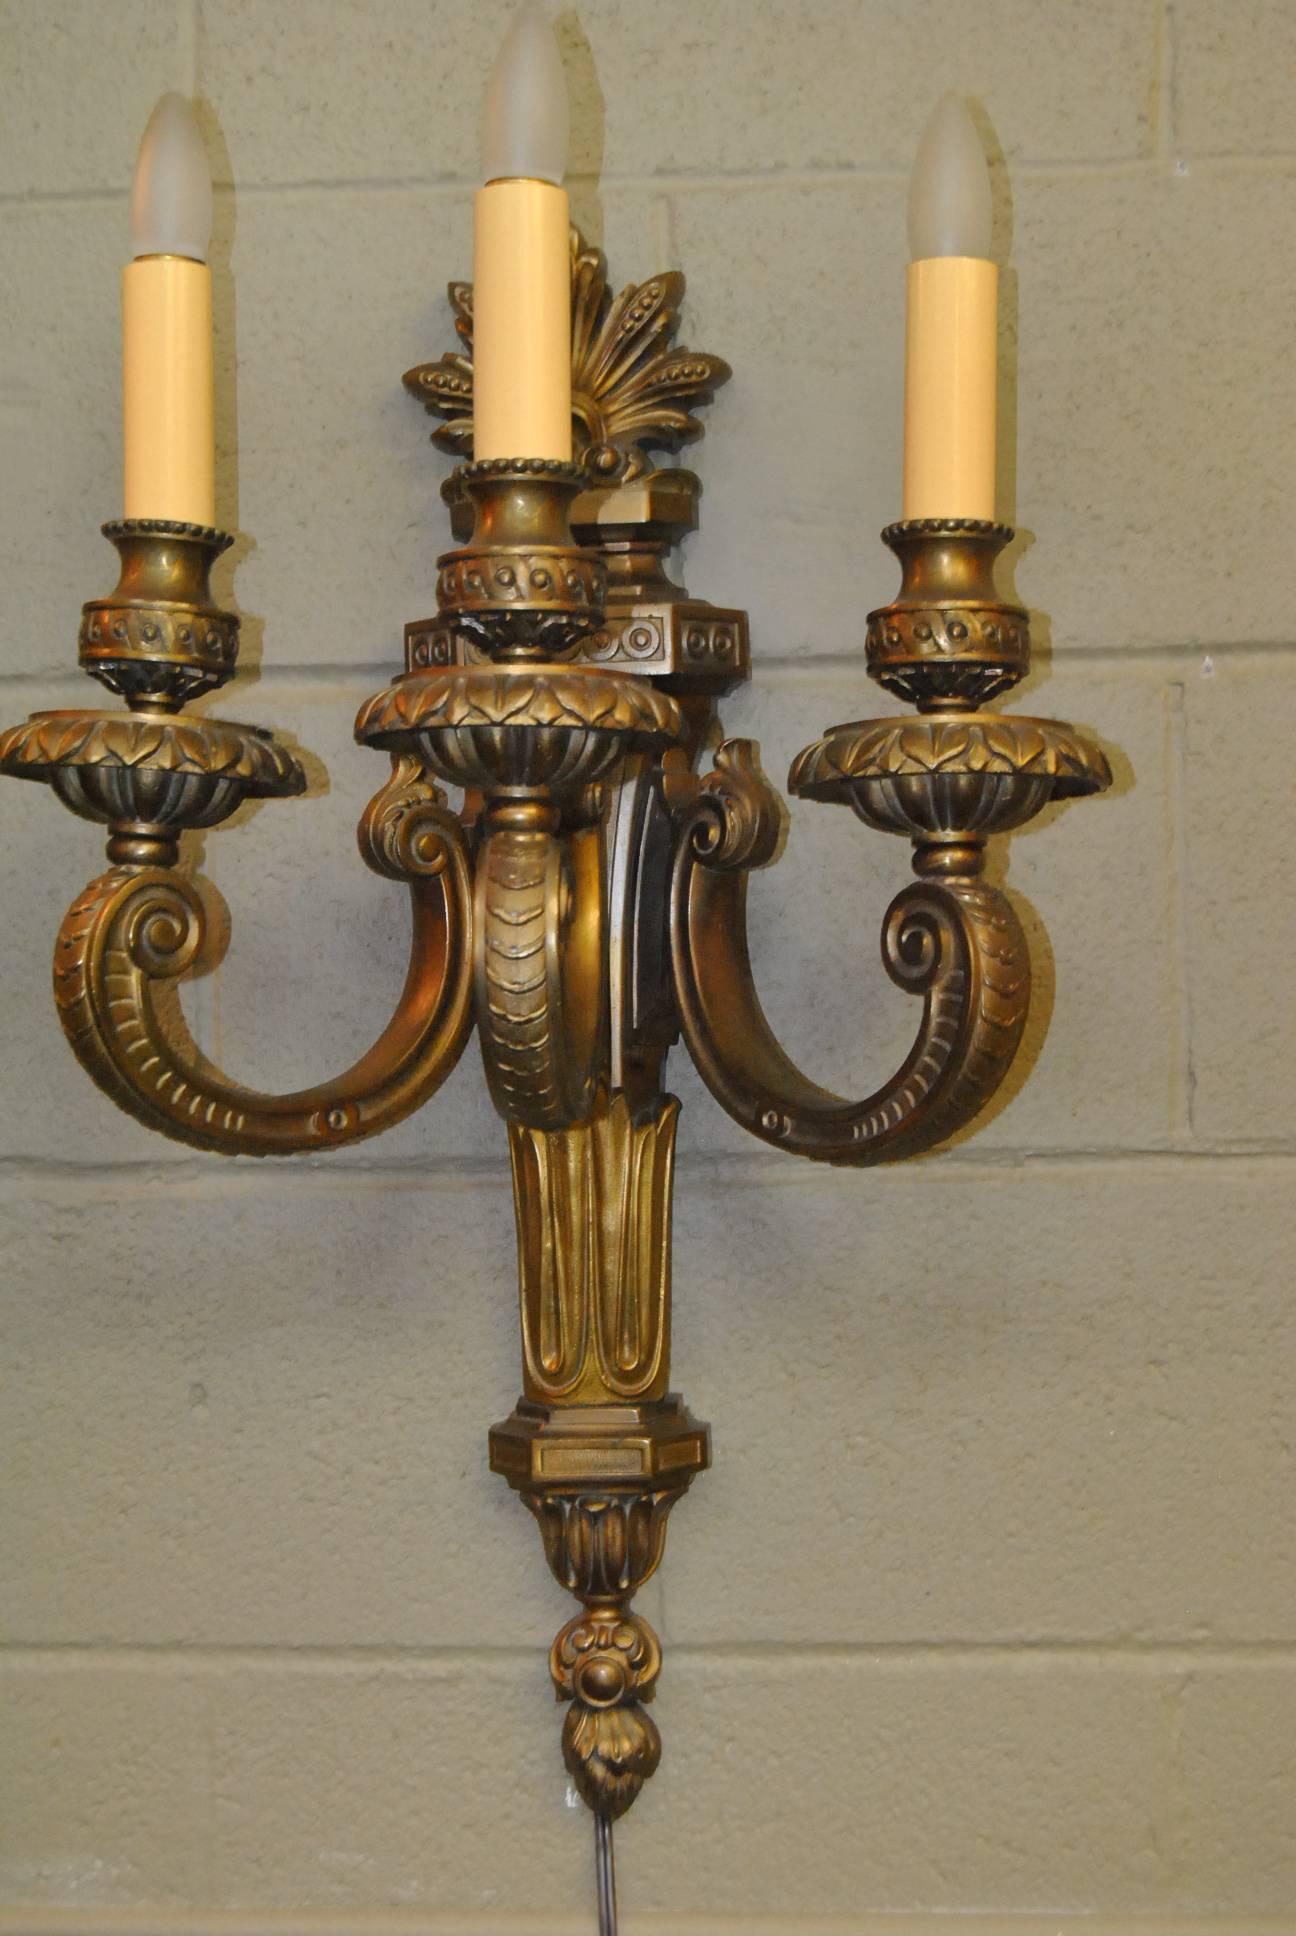 Early 20th Century Ornate Doré Bronze Neoclassical Three-Arm Wall Sconce